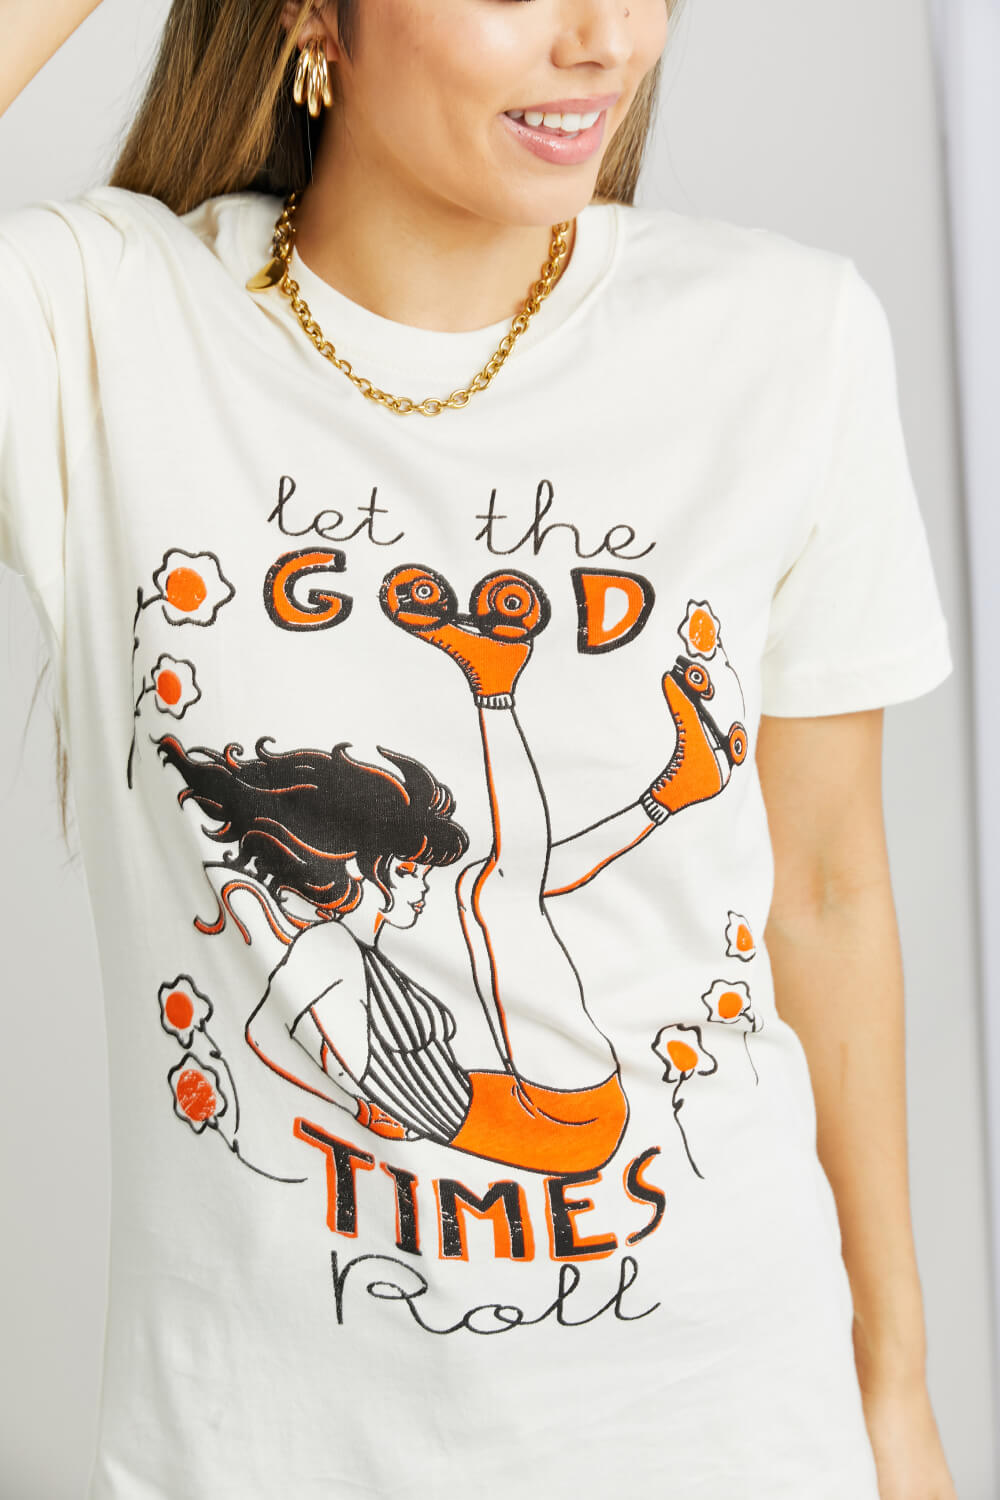 mineB Full Size LET THE GOOD TIMES ROLL Graphic Tee Trendsi